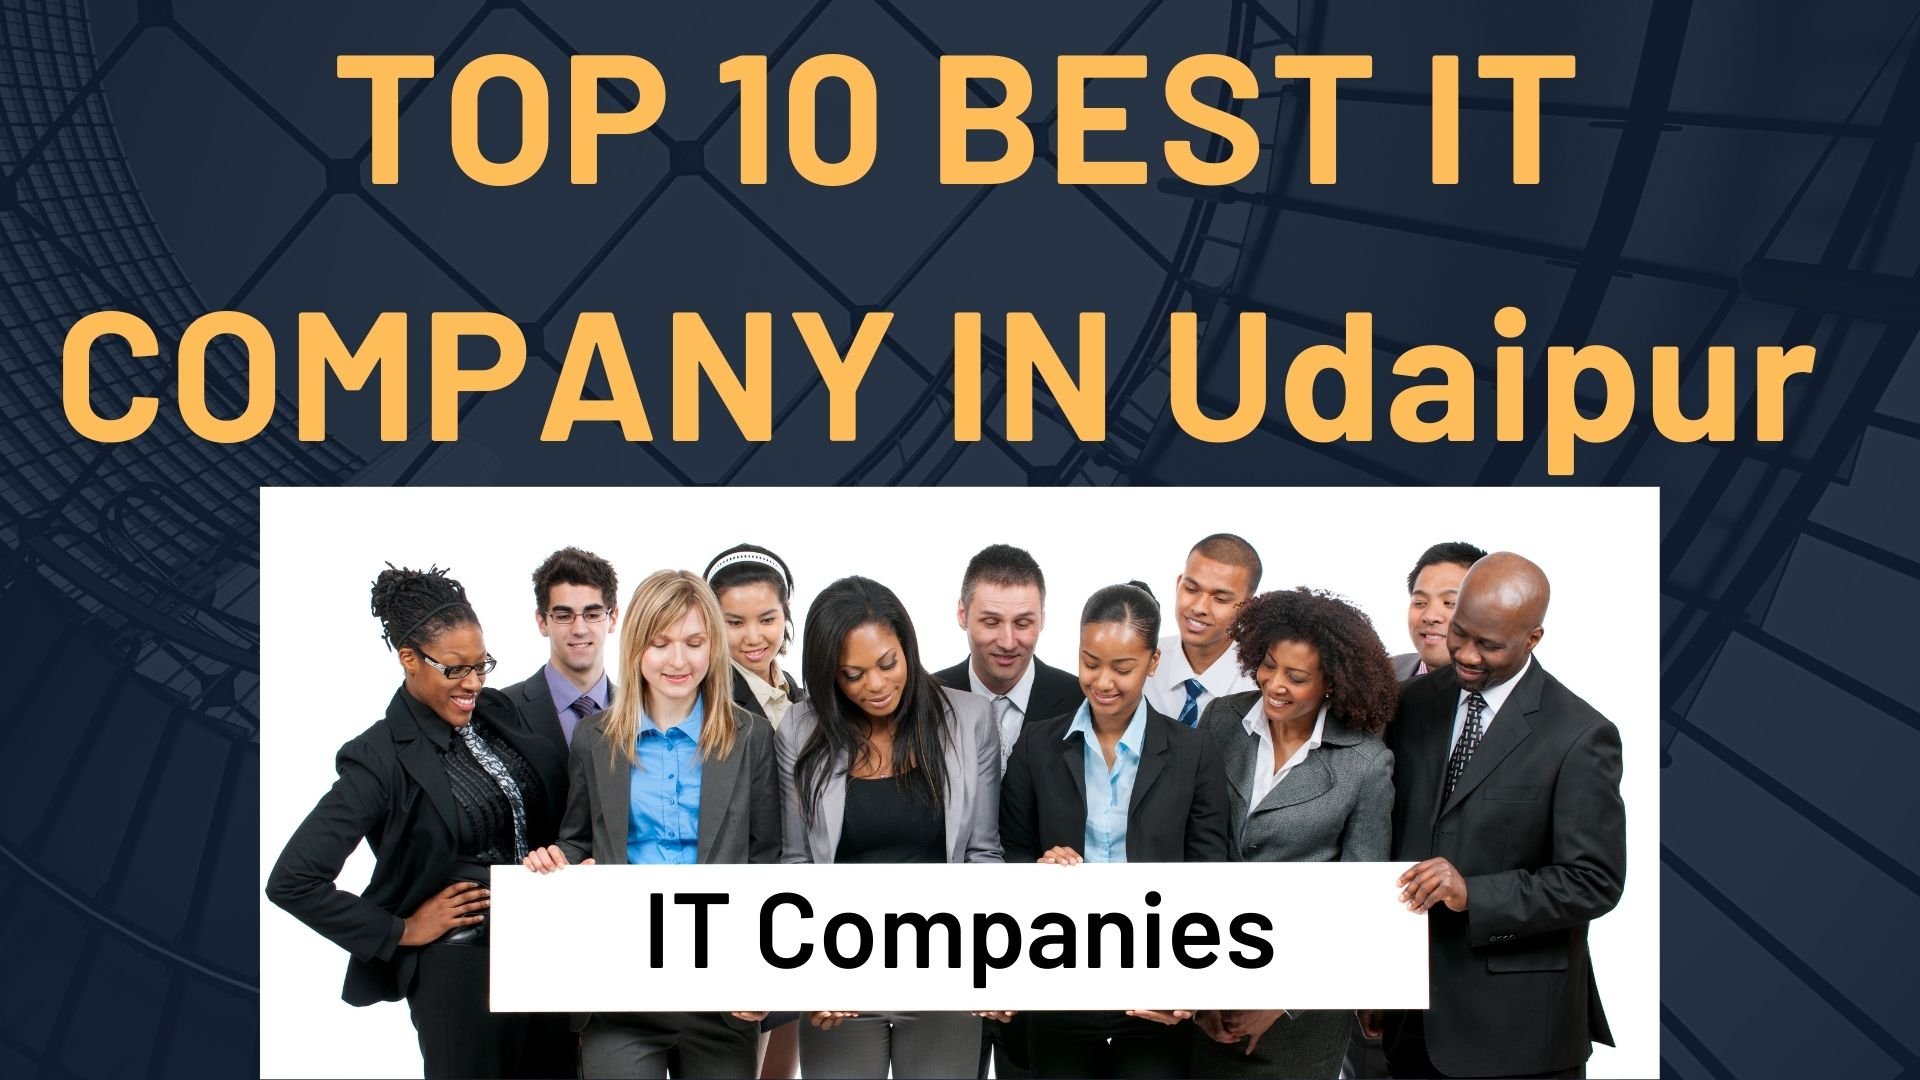 Top It companies in udaipur